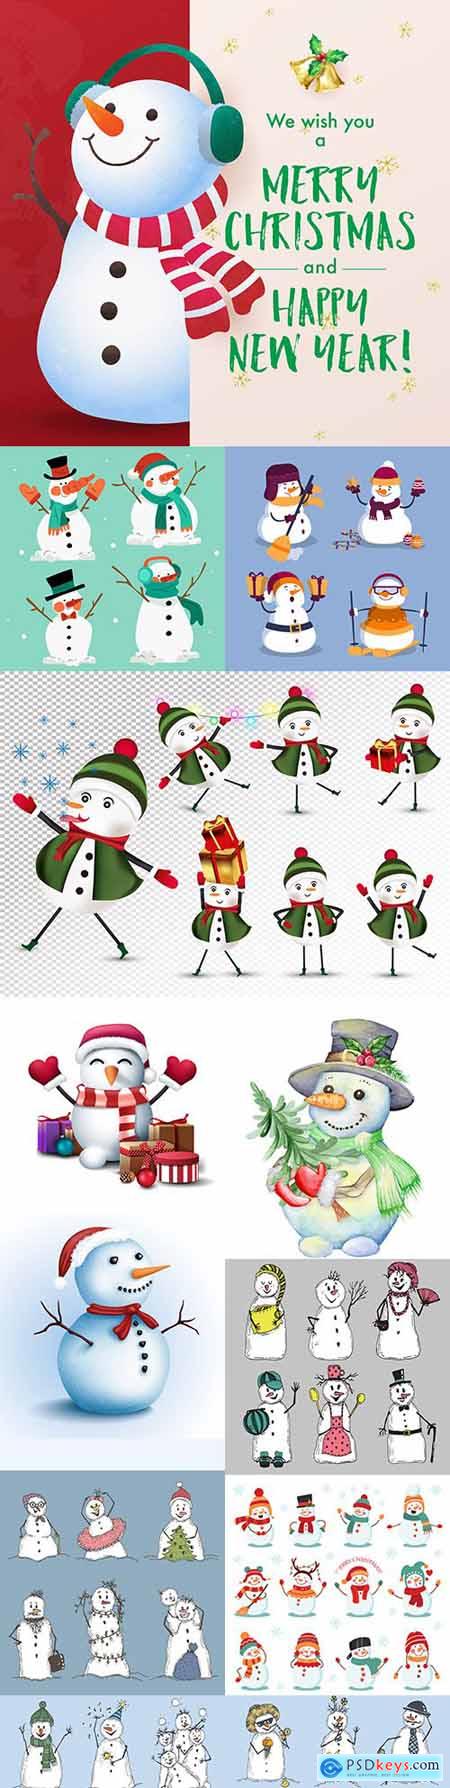 Cheerful snowmen in different costumes Christmas illustrations